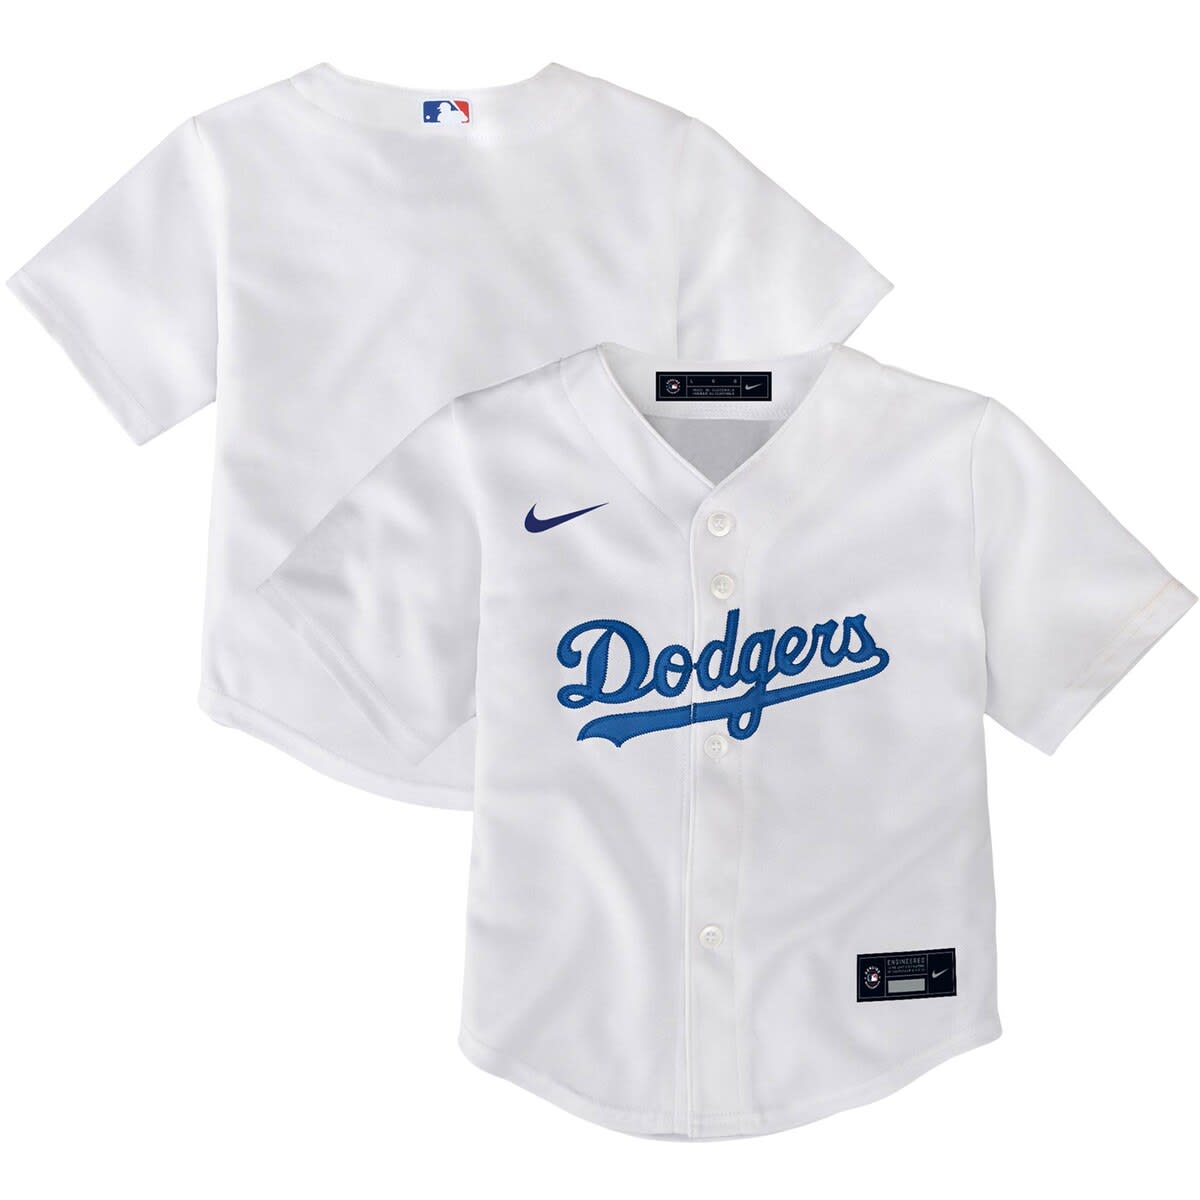 Ray Jacobs kids jersey